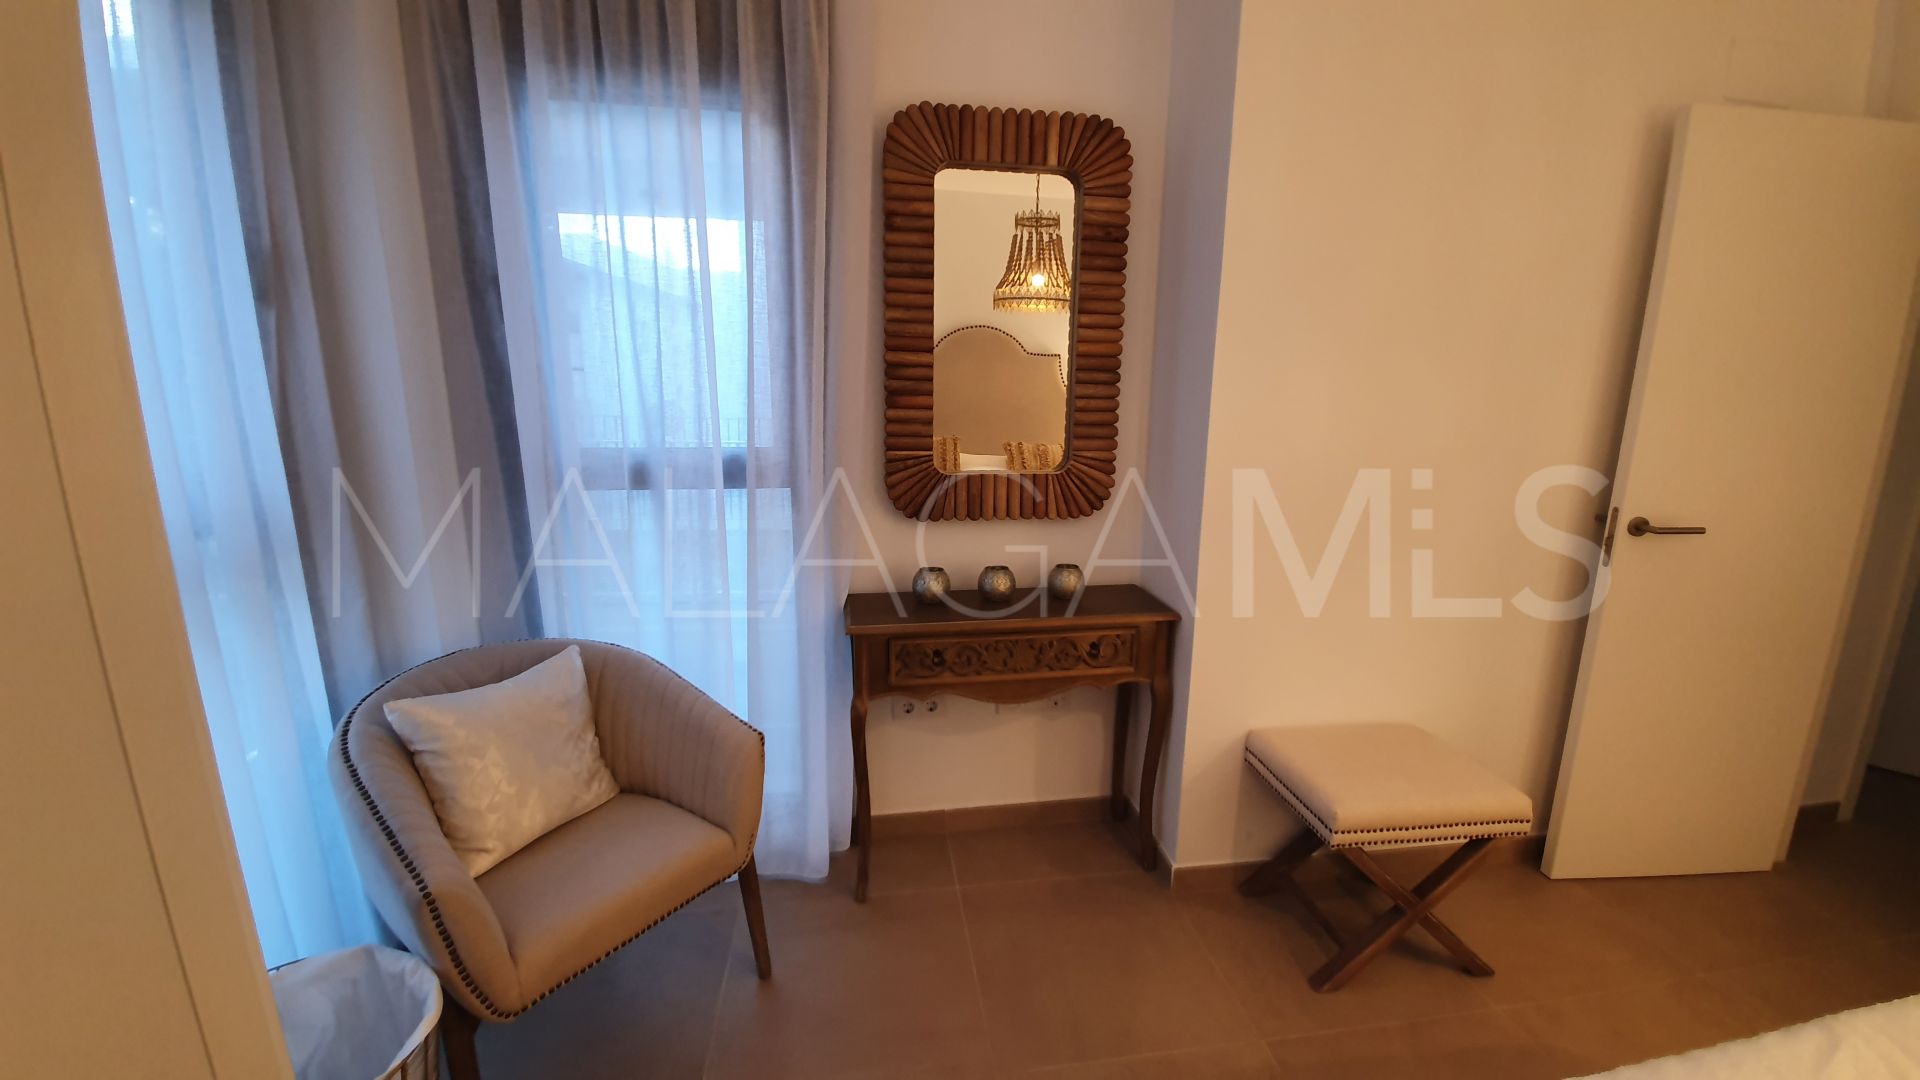 2 bedrooms Manilva penthouse for sale